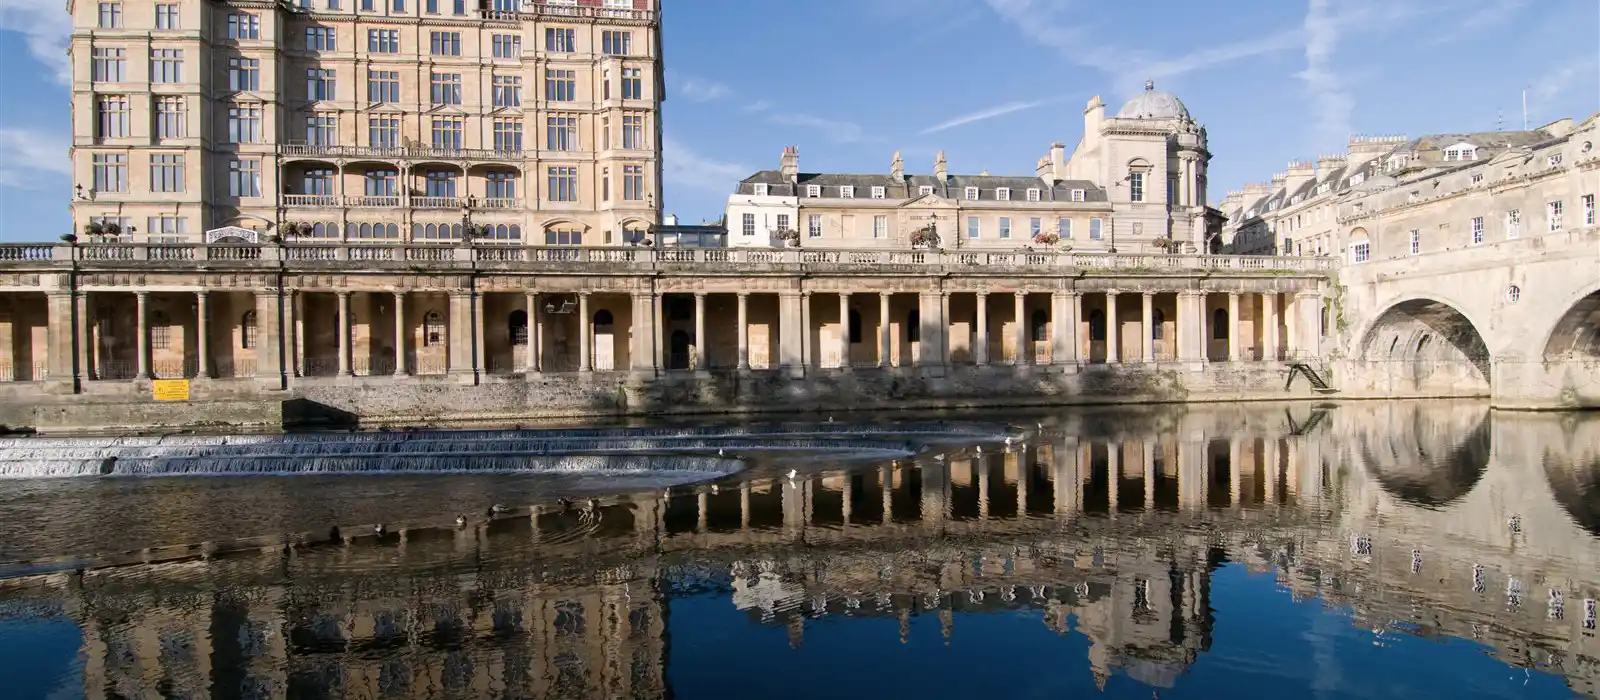 You can take a free guided city tour of Bath